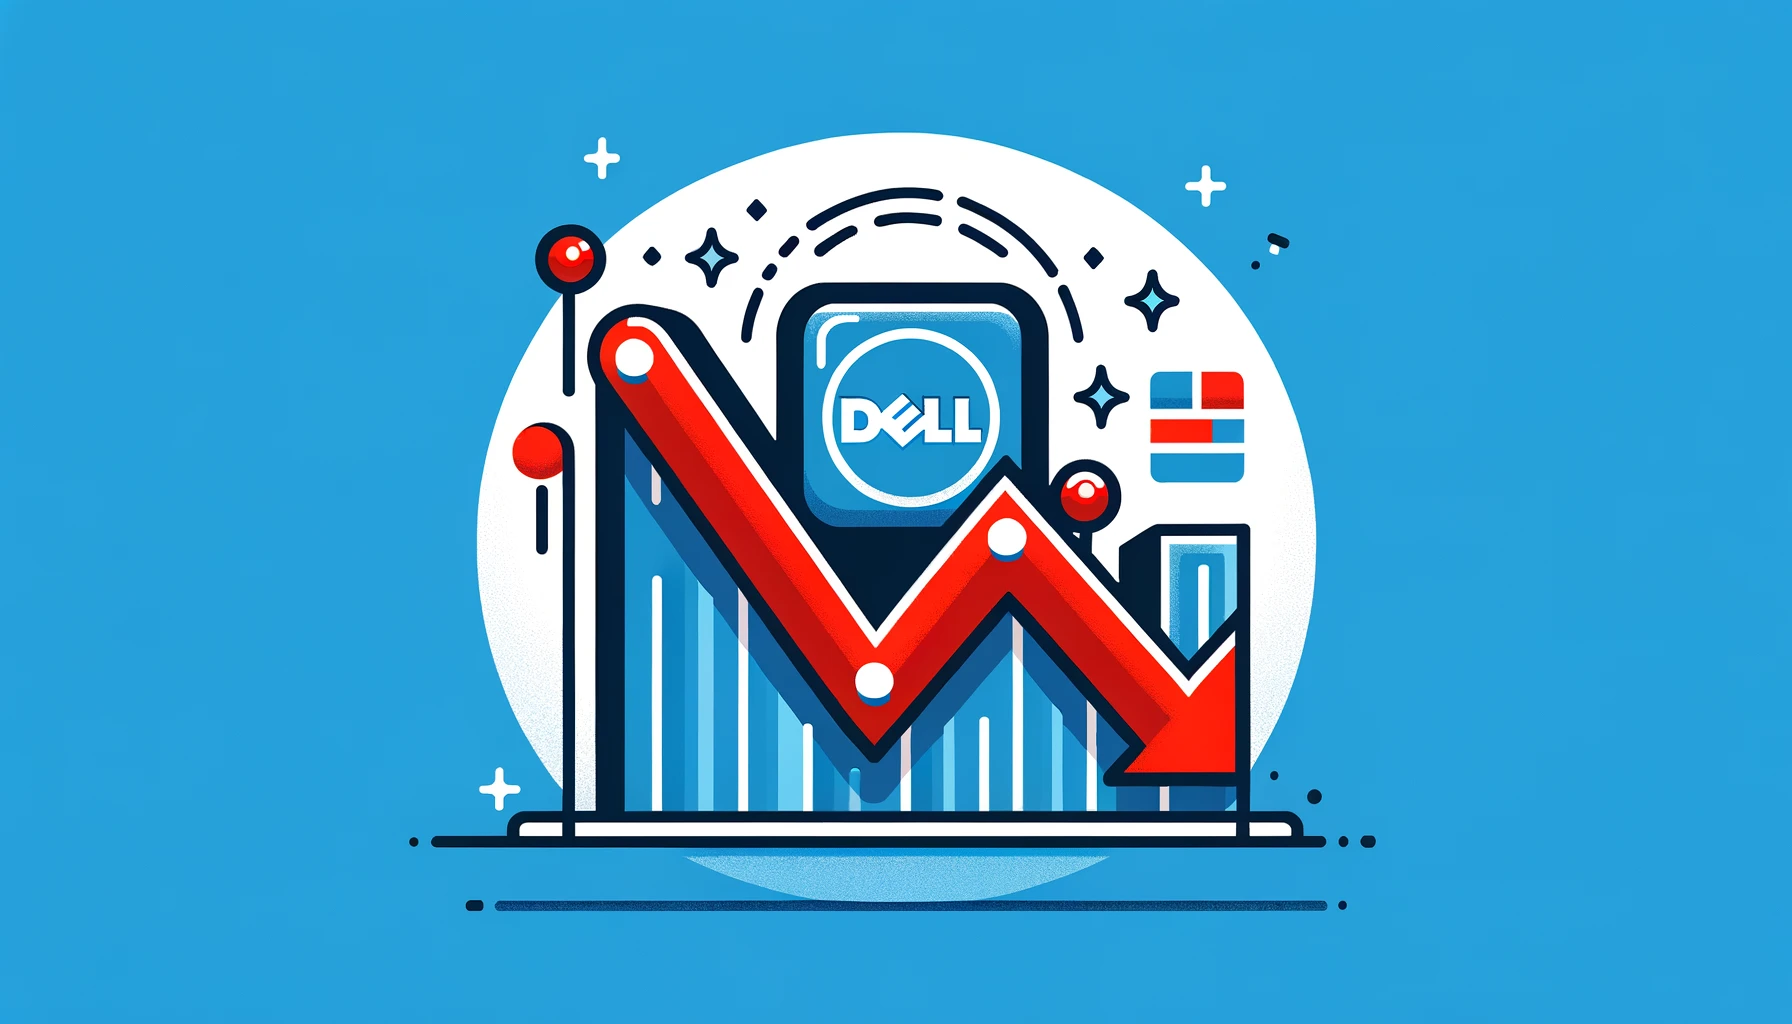 Dell Shares Decline Despite Growth in AI Server Business